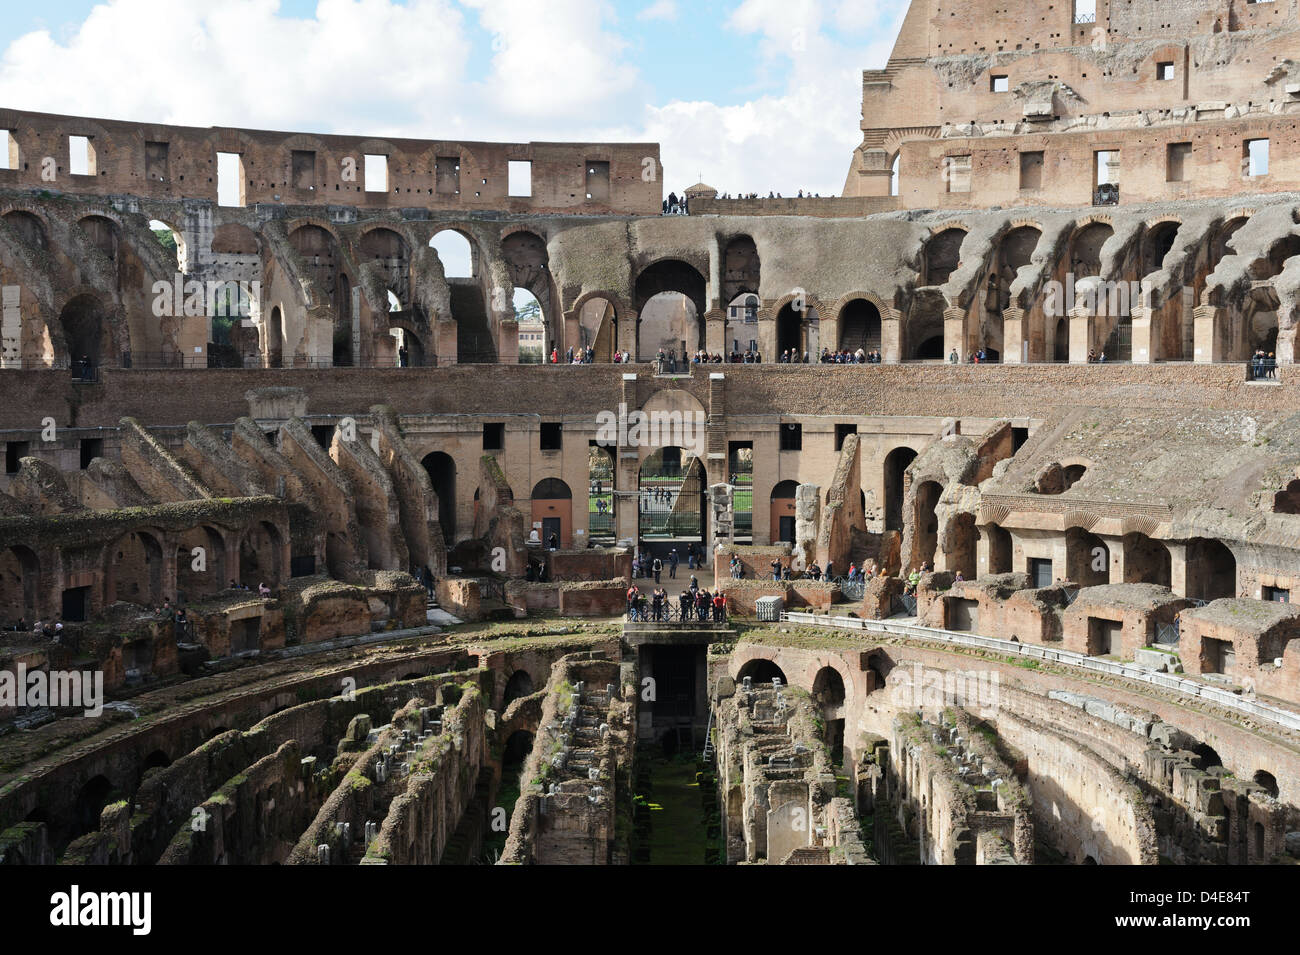 The ruins of the ancient Roman Colosseum at the heart of the Roman Empire, in Rome the capital city of modern day Italy. Stock Photo